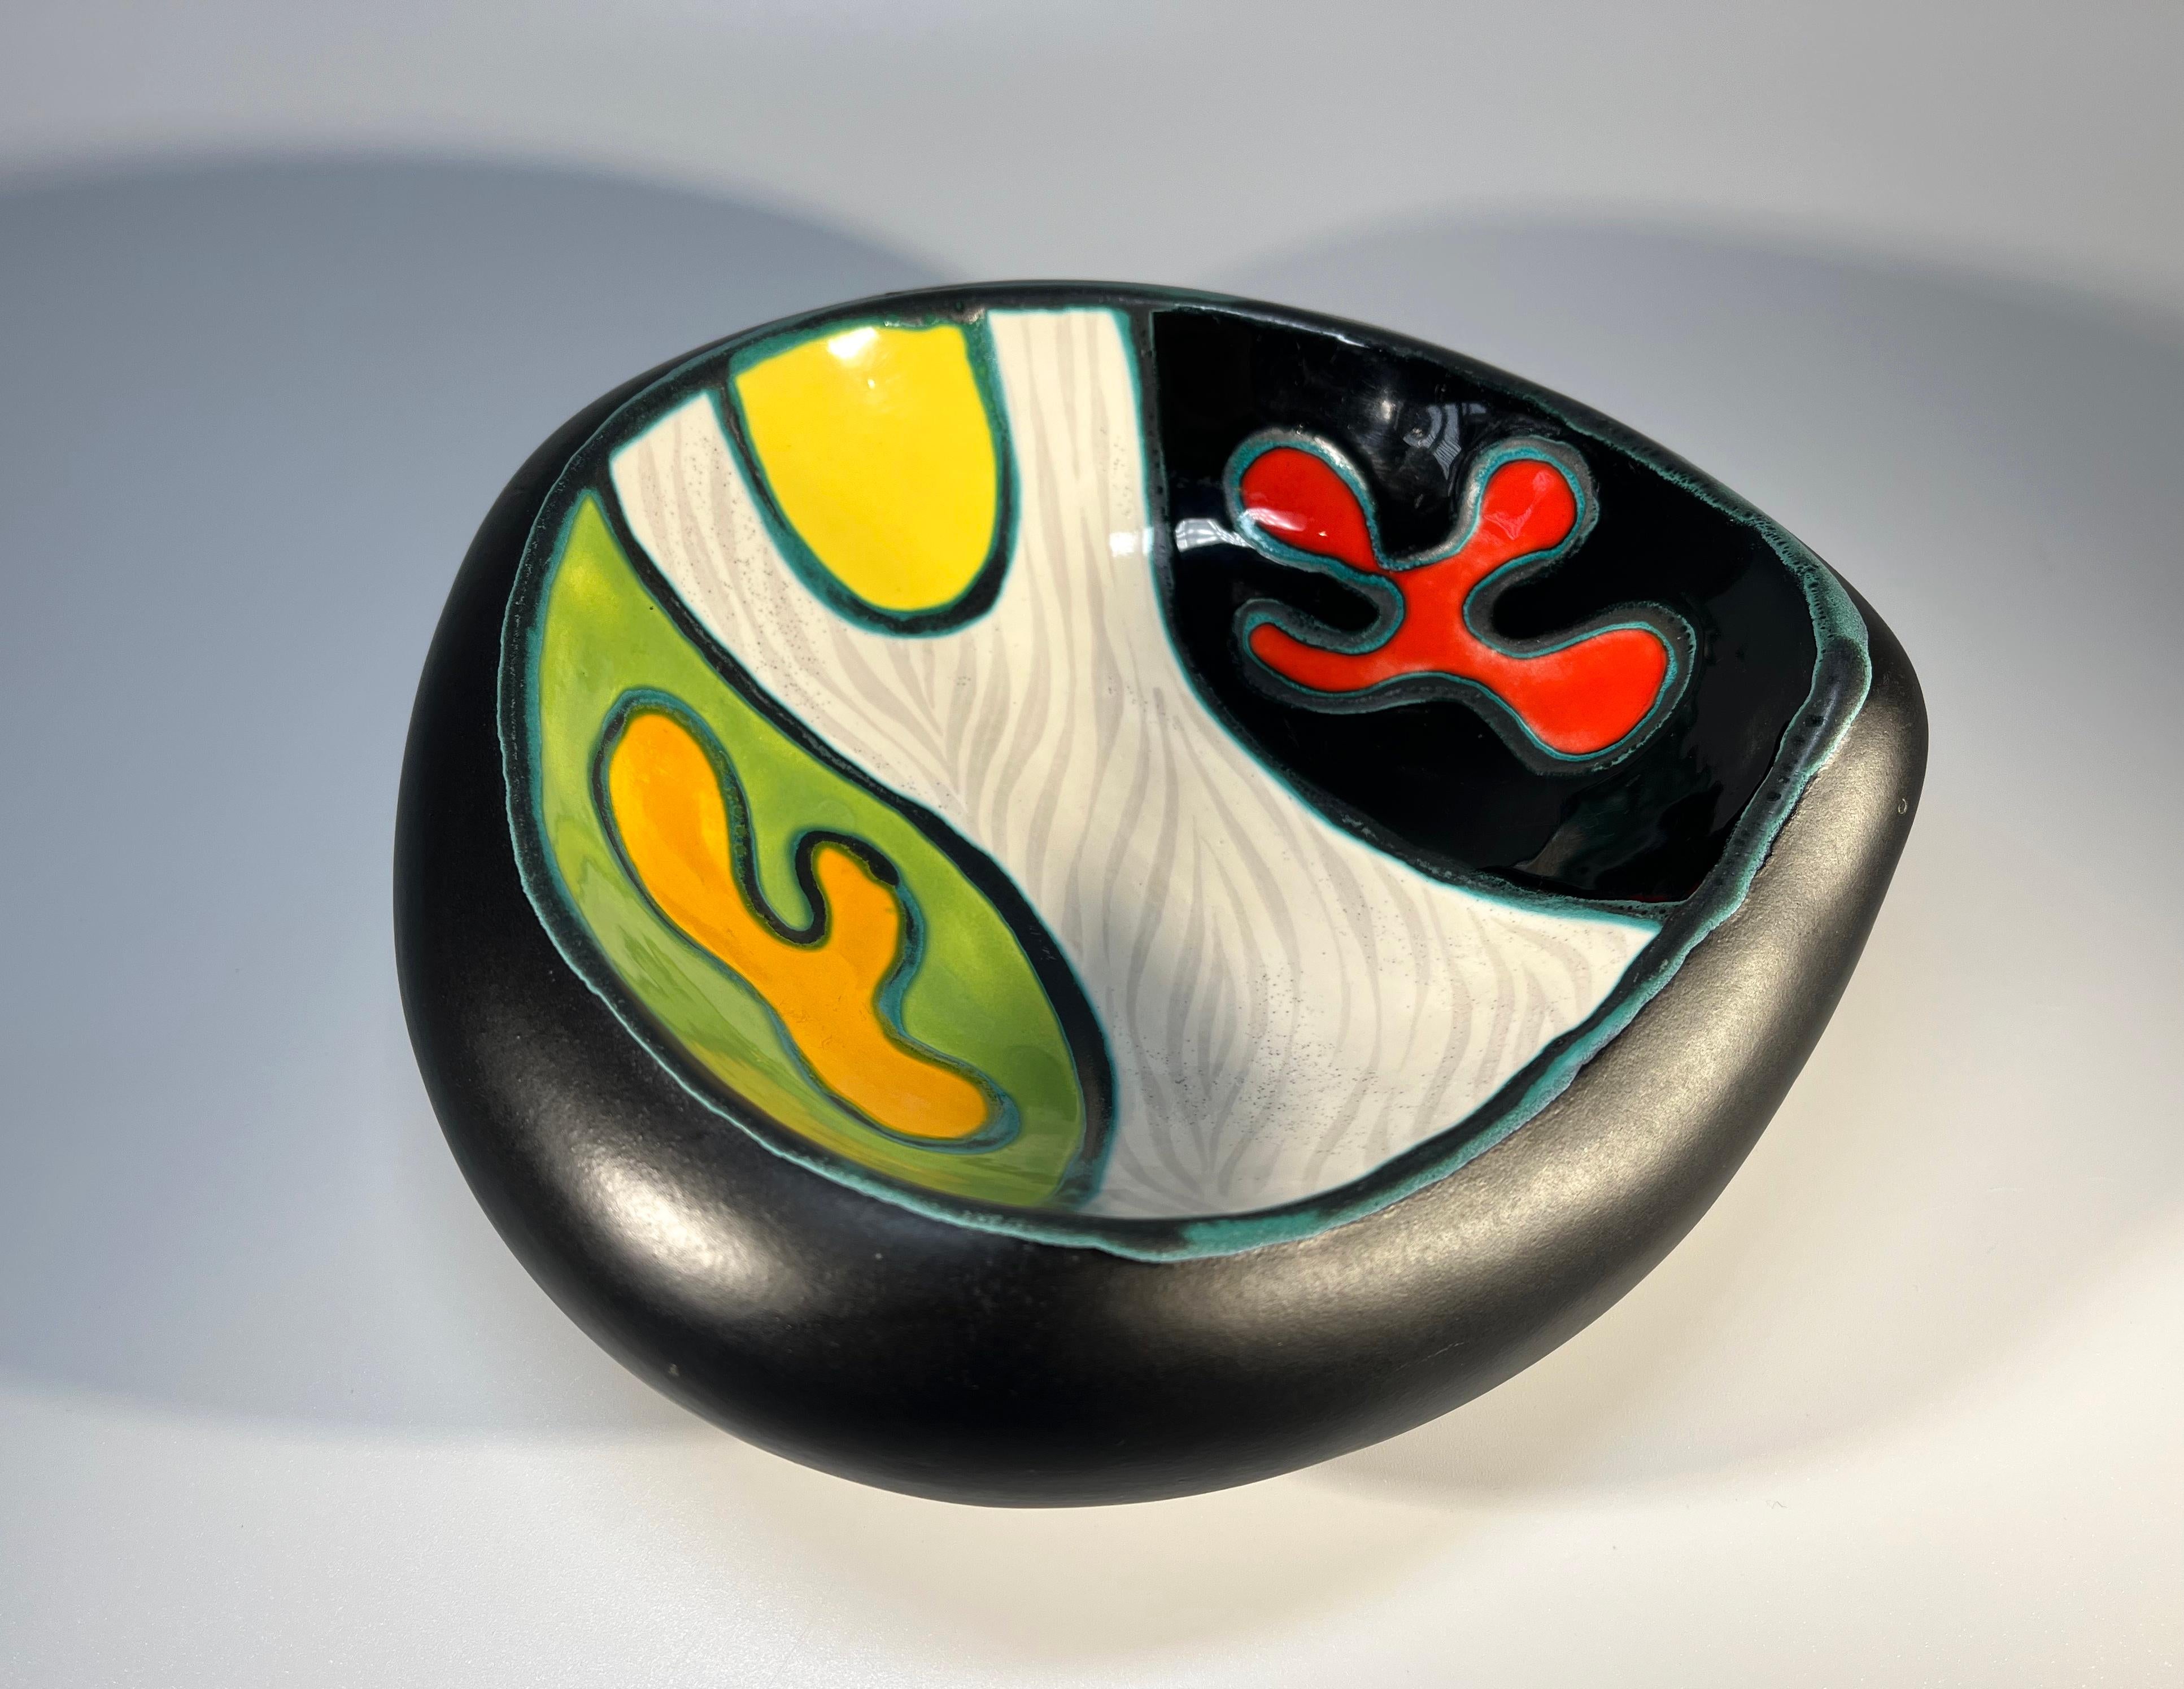 Organic in form, abstract ceramic vide poche by Gabriel Fourmaintraux, France
Strong pallet of red, yellow and orange enamels contrast wonderfully with the exterior matt black glaze
Circa 1950
Height 1.5 inch, Width 3.5 inch, Depth 5 inch
Very good